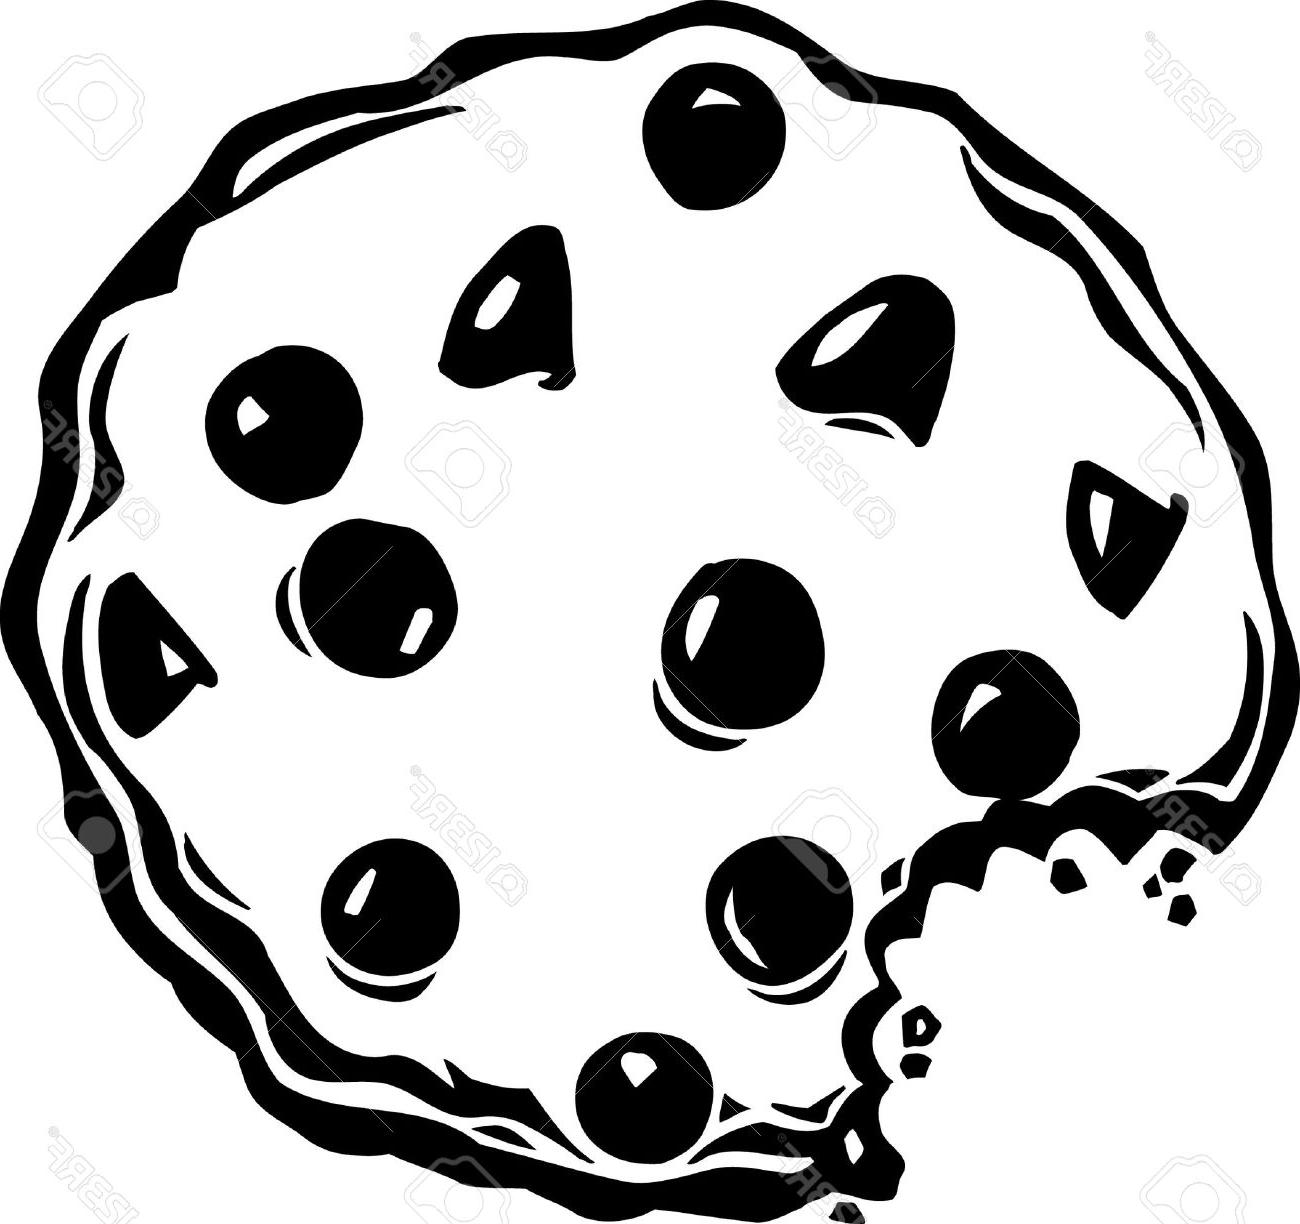 Cookie clipart black and white